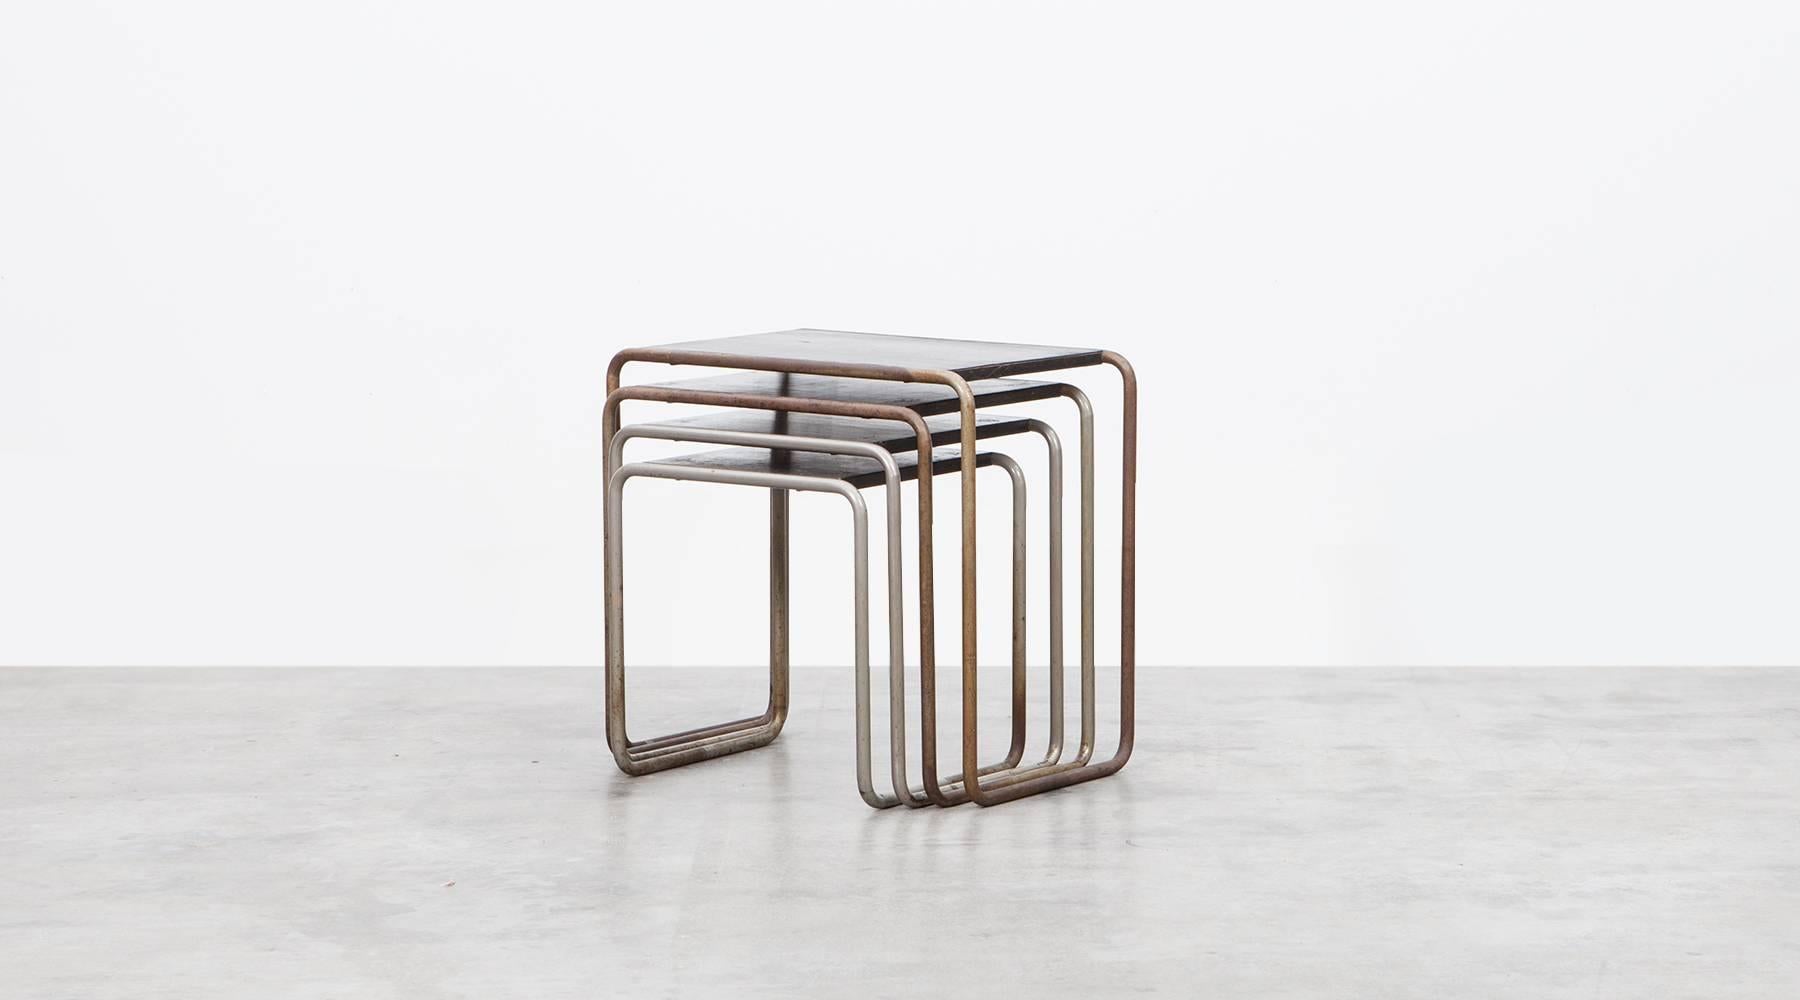 Set of four nesting tables made out of black lacquered stained wood on chromium-plated steel base. The set is designed by Marcel Breuer, who was the inventor of the modern steel tube furniture. Manufactured by Thonet.

All are 40 cm deep and height